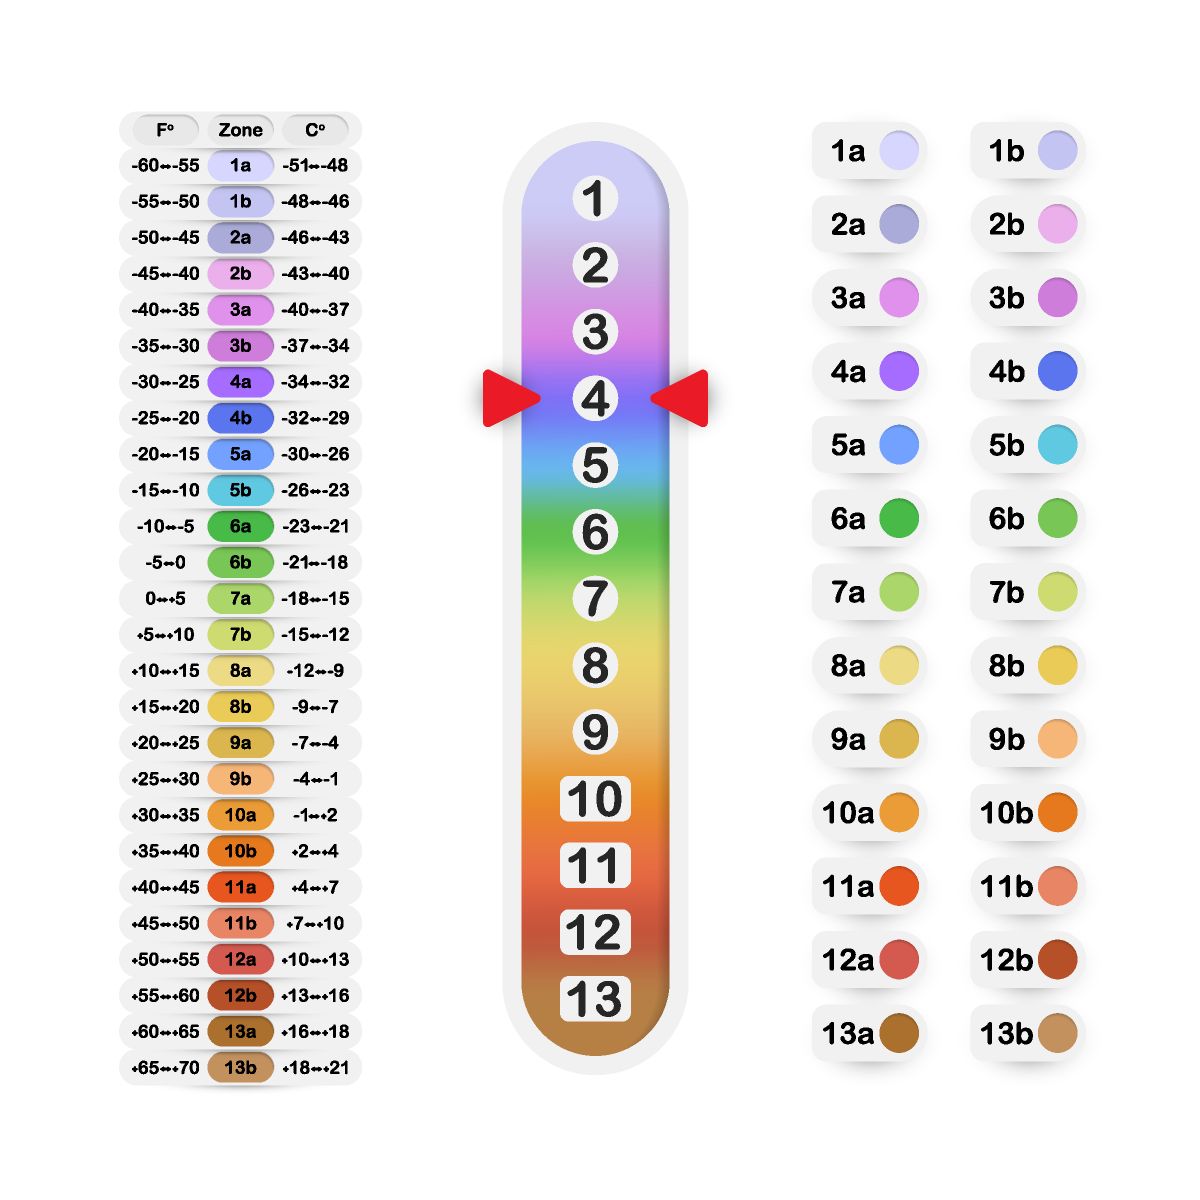 Graphic showing temperature ranges for different growing zones